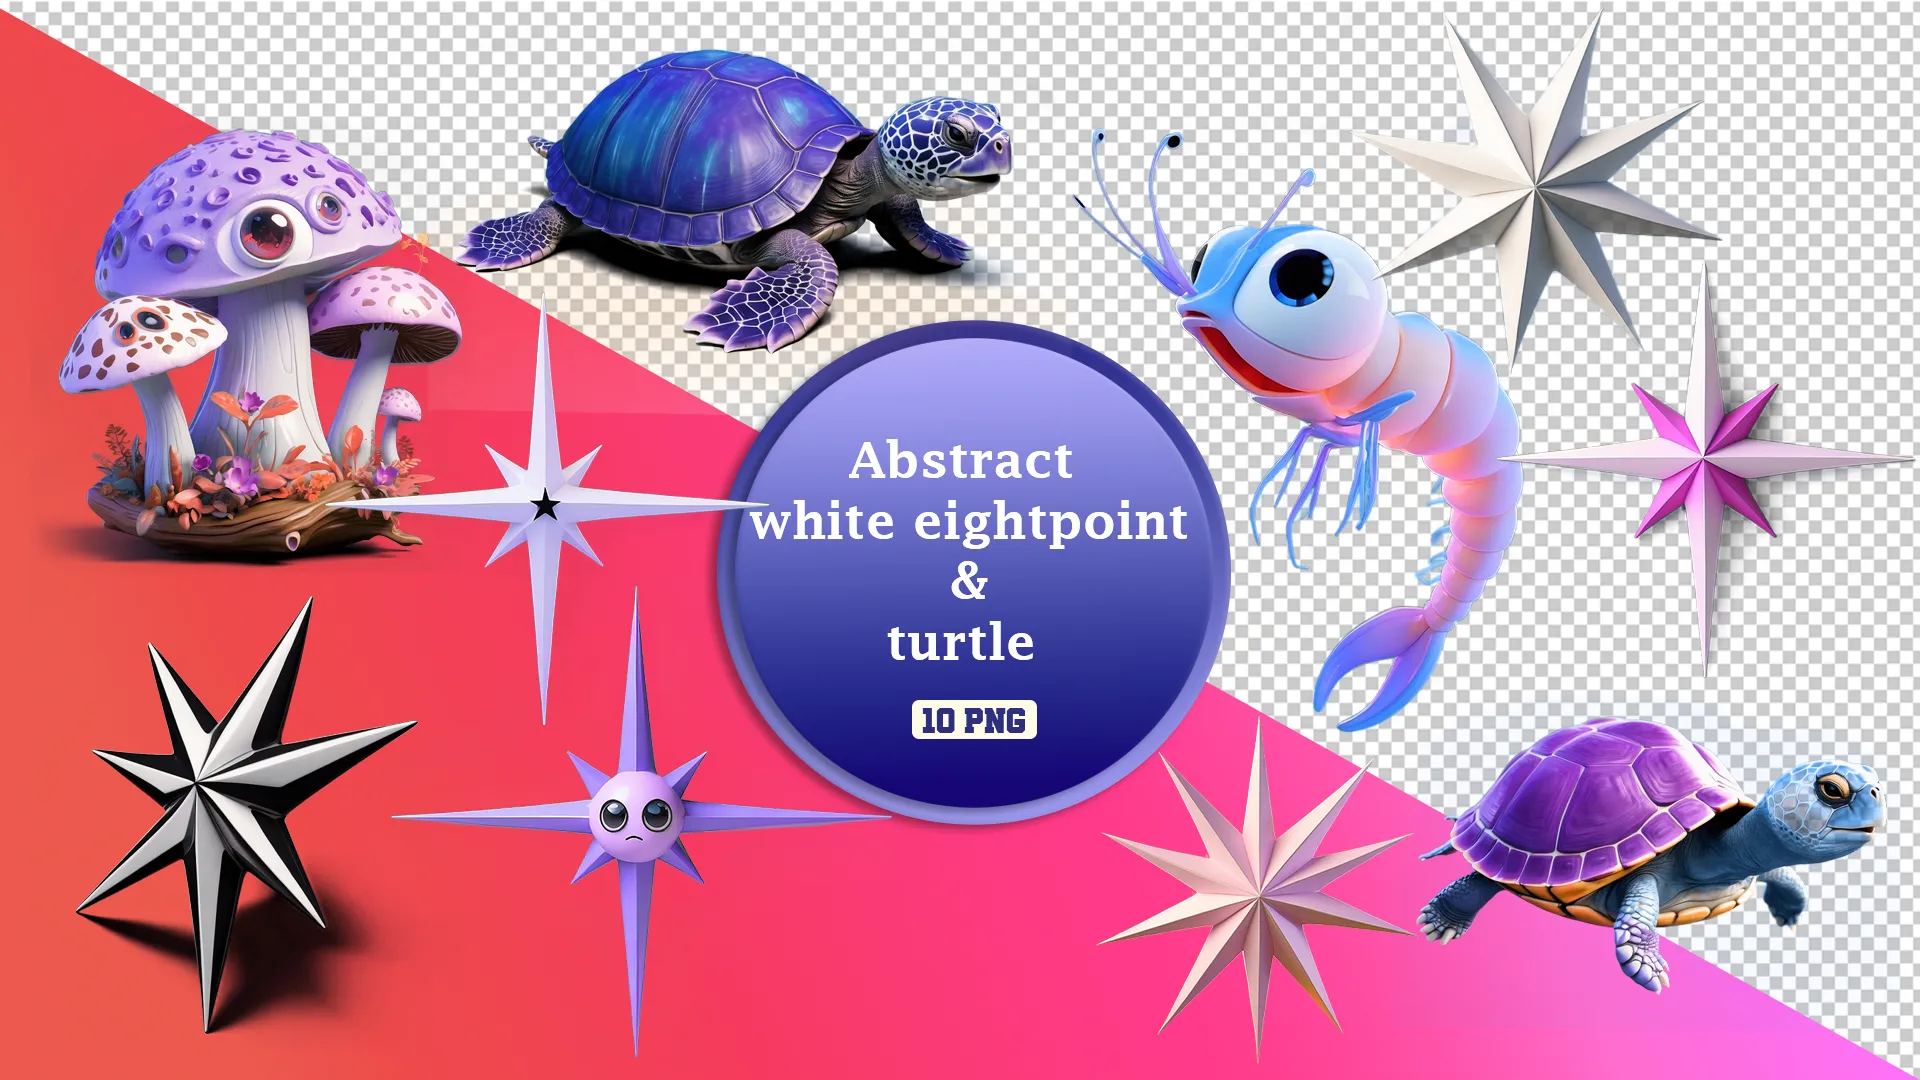 Cheerful Turtles and Magical Starburst 3D Design Pack